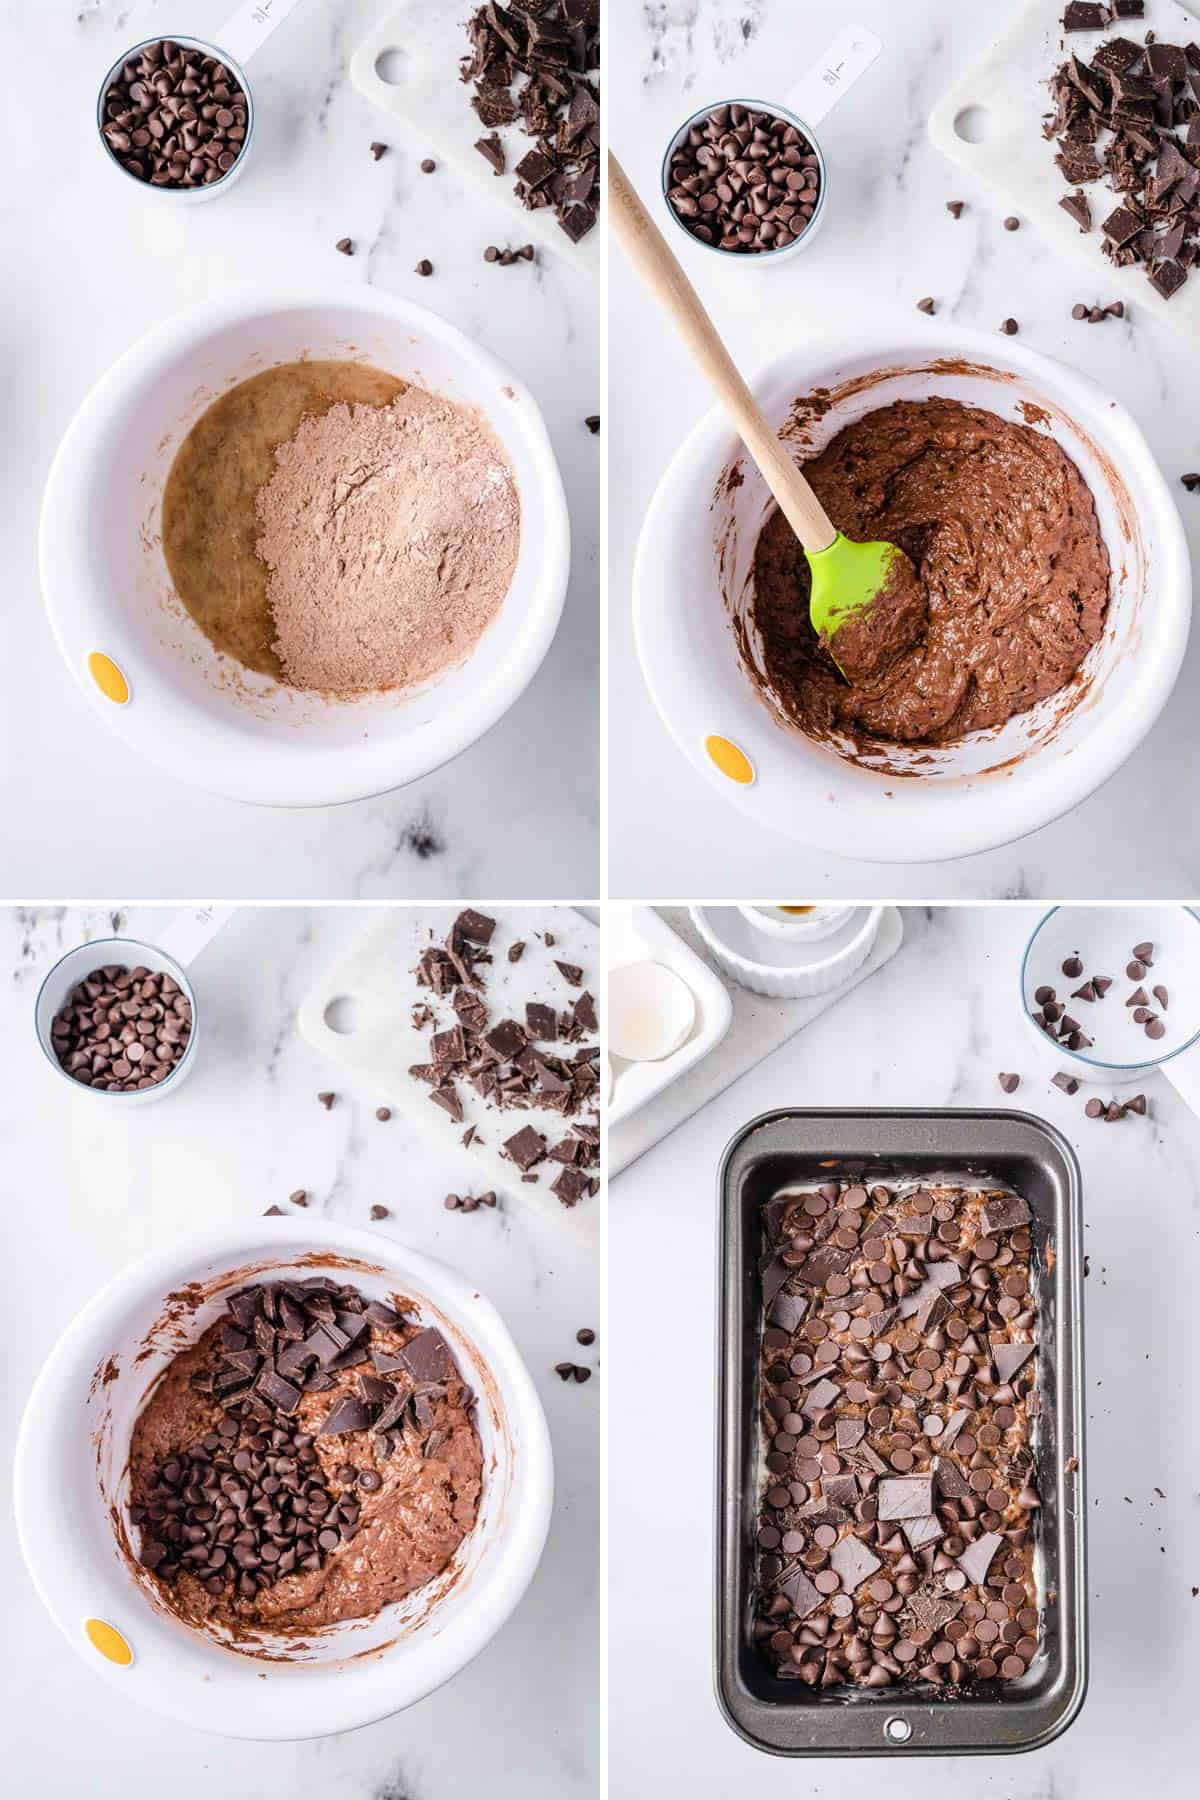 A collage shows step by step instructions how to make triple chocolate banana bread.